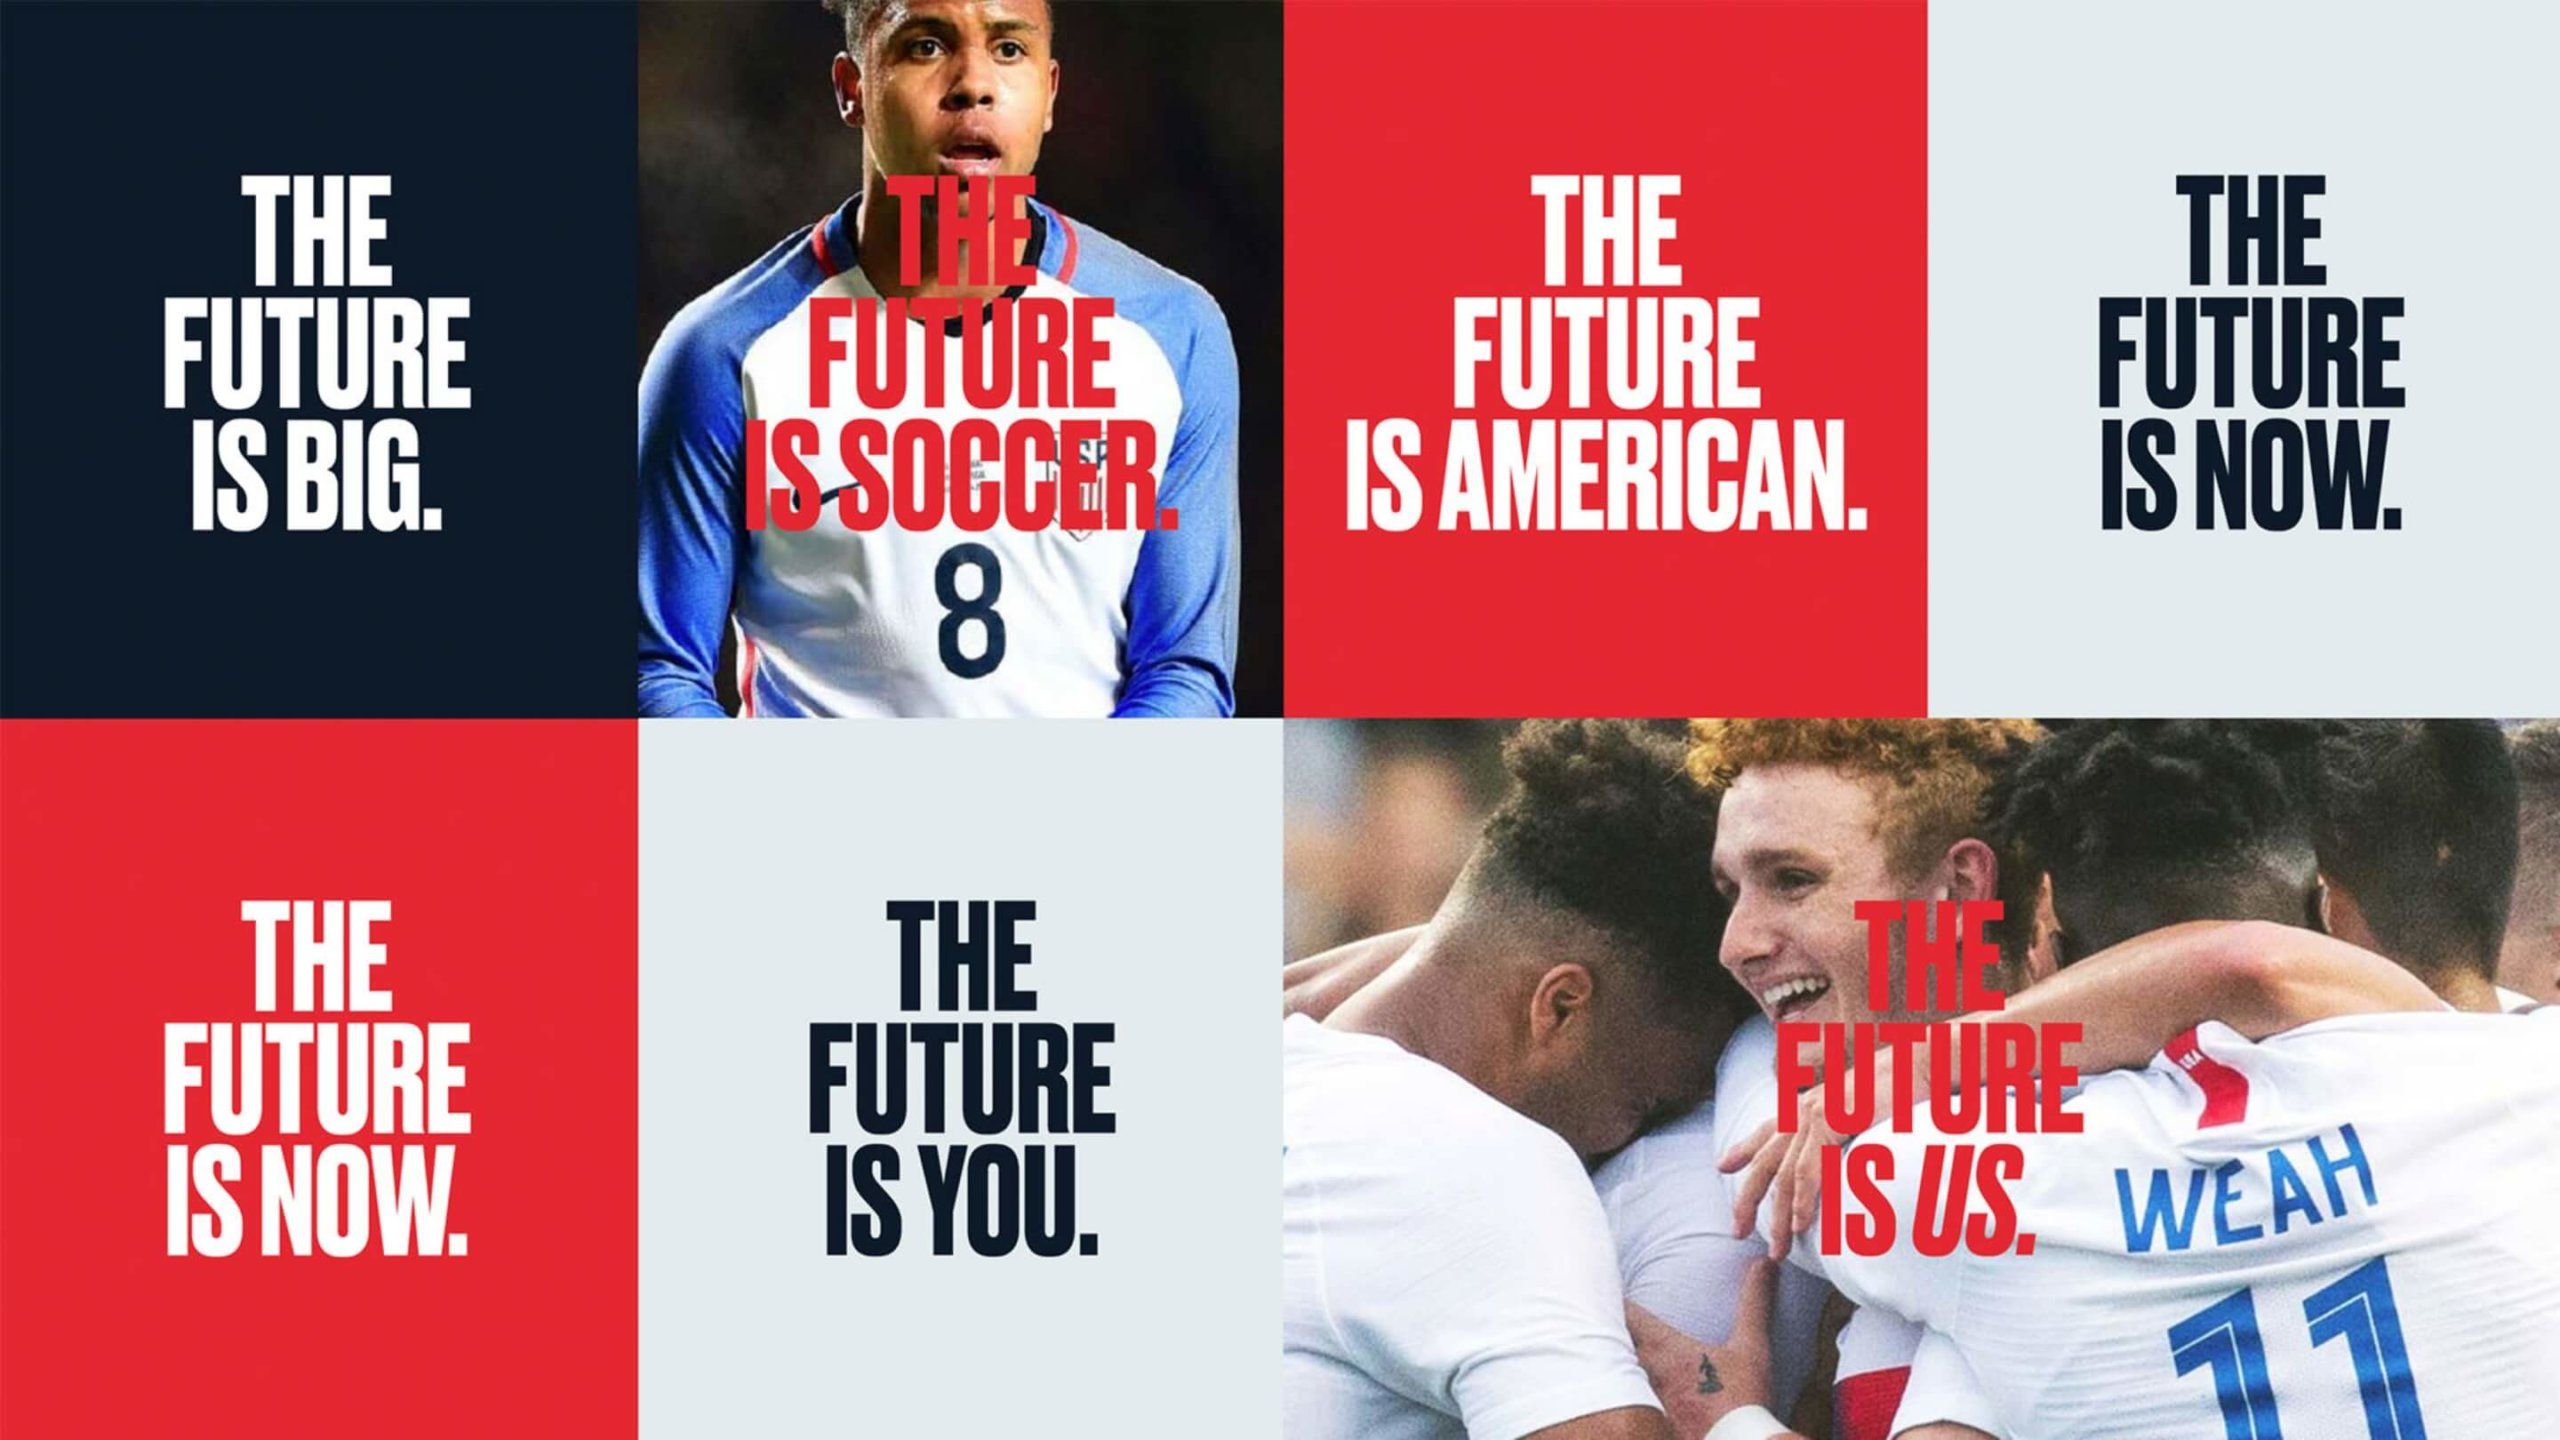 The future is big. The future is soccer. The future is American. The Future is now. The Future is you. The Future is us.